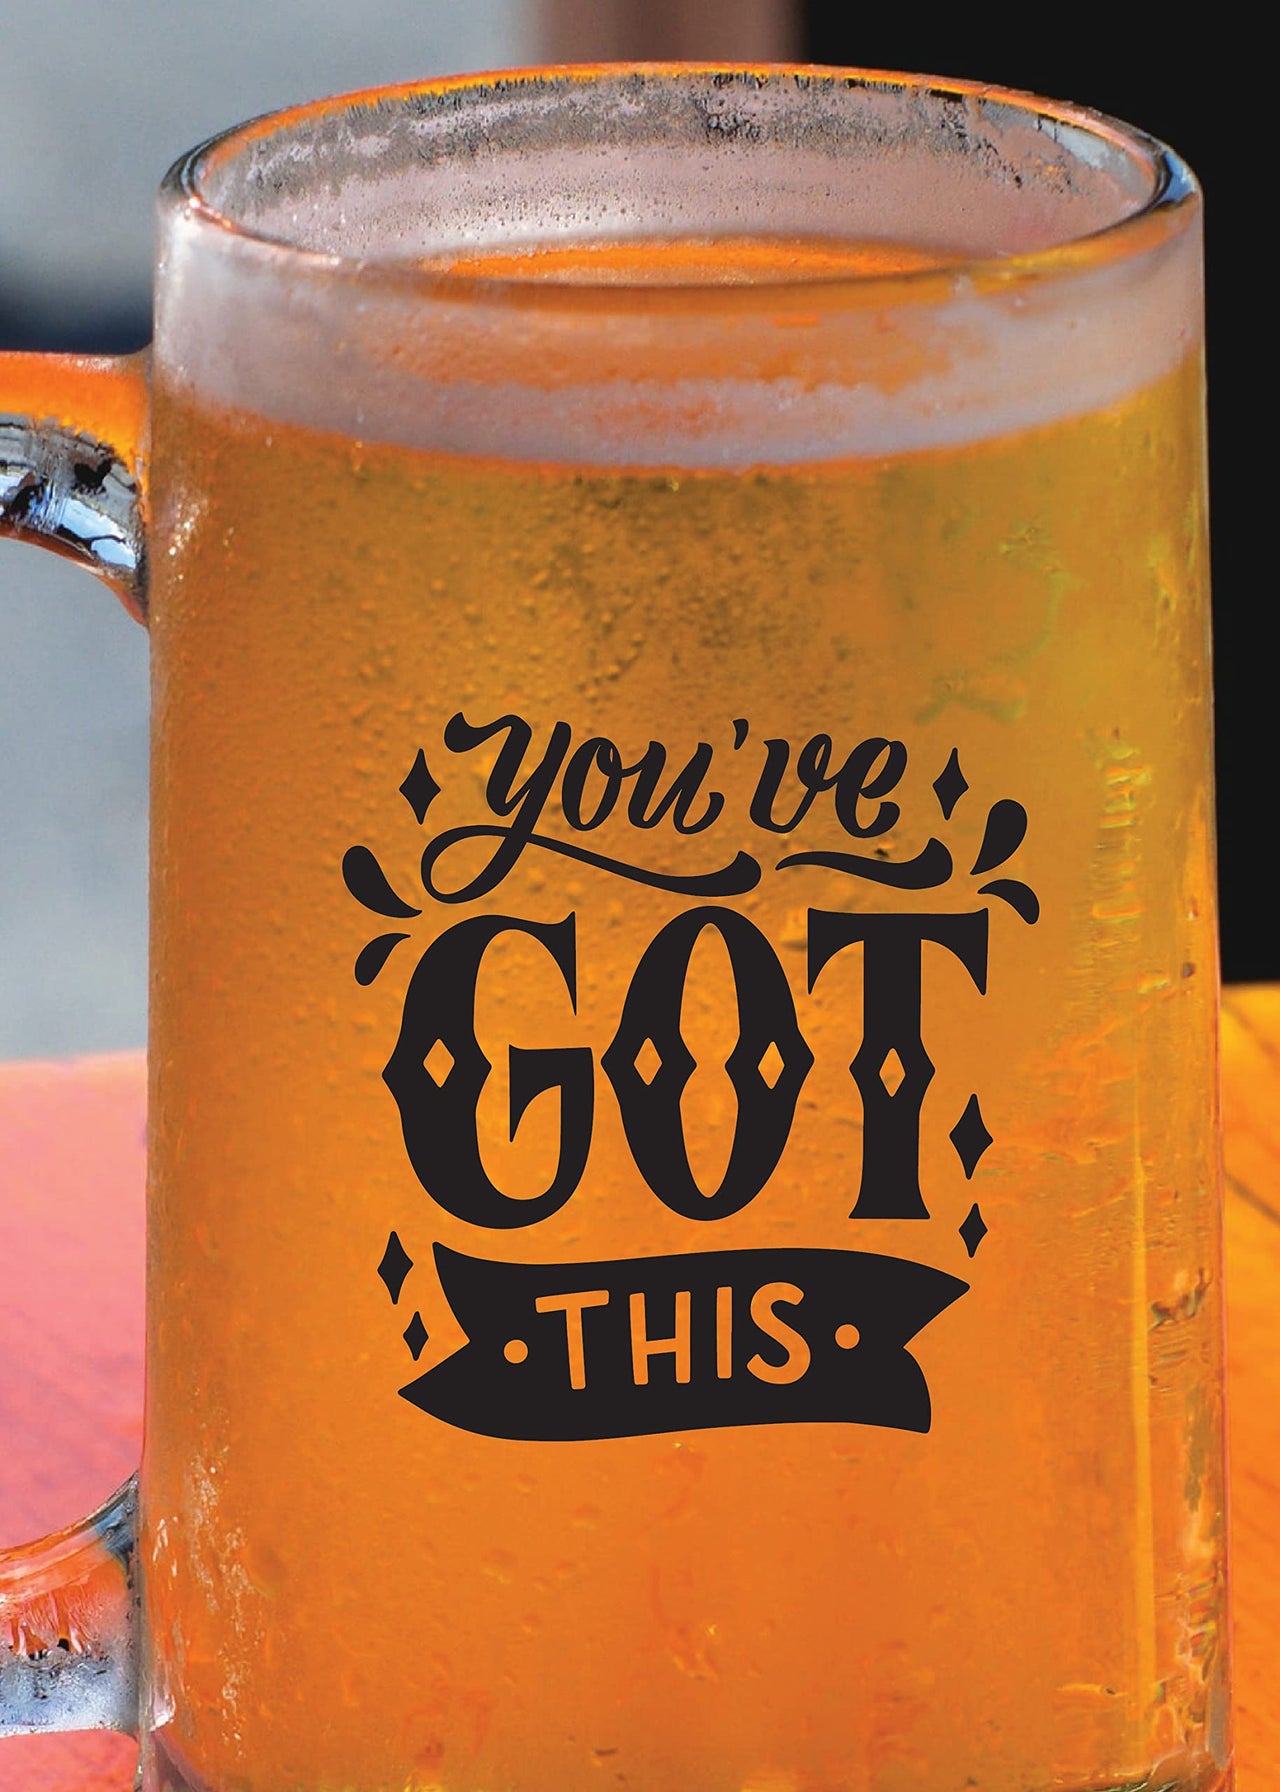 You've Got This - Beer Mug -1 Piece Clear 500 ml - Transparent Glass Printed Beer Mug with Handle Gift for Men